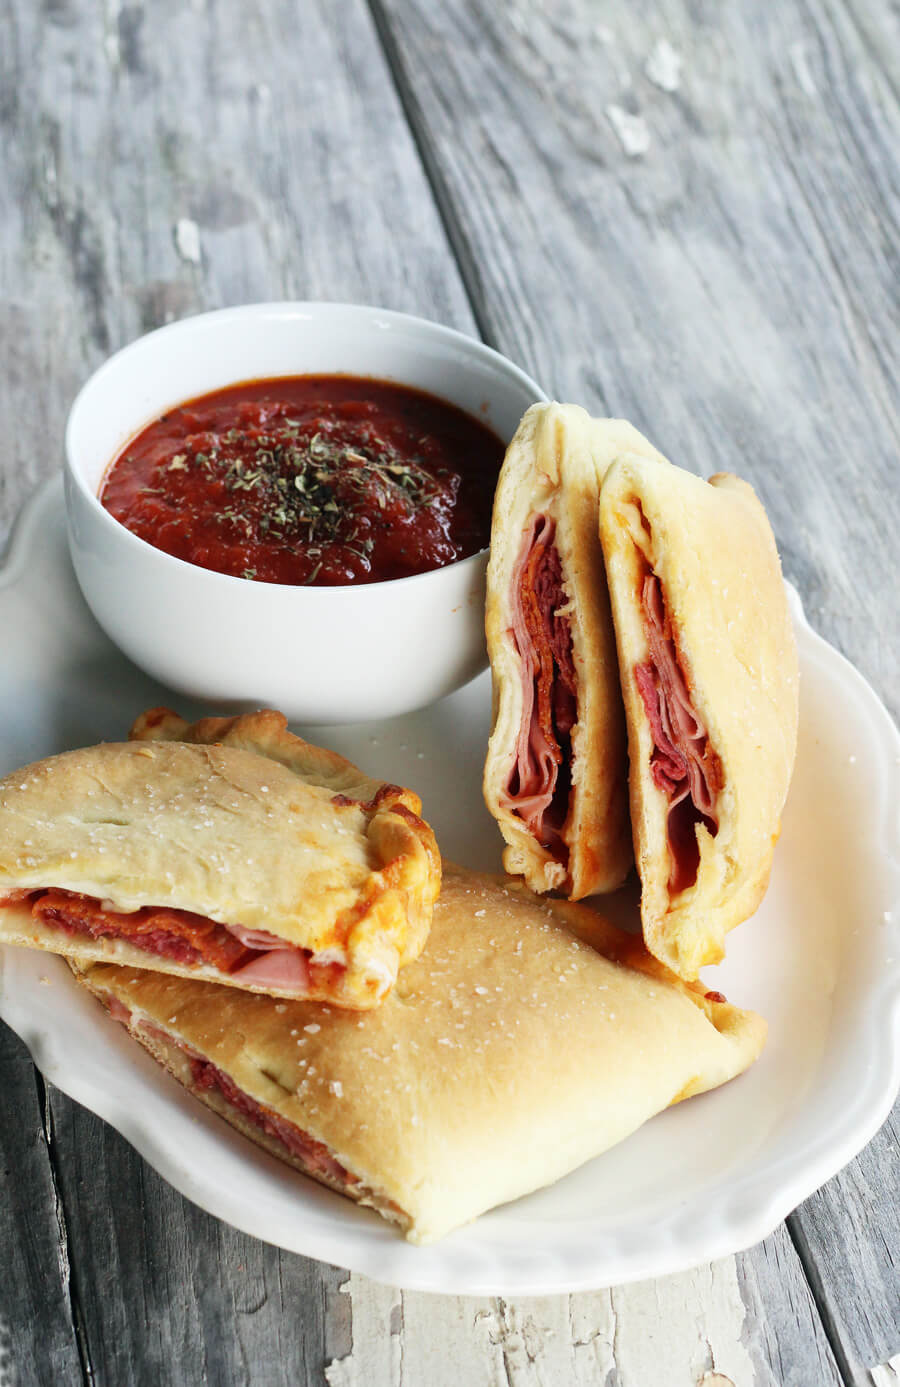 Made with a soft, scratch made dough, these Pizza Calzones are little pockets of pizza heaven.